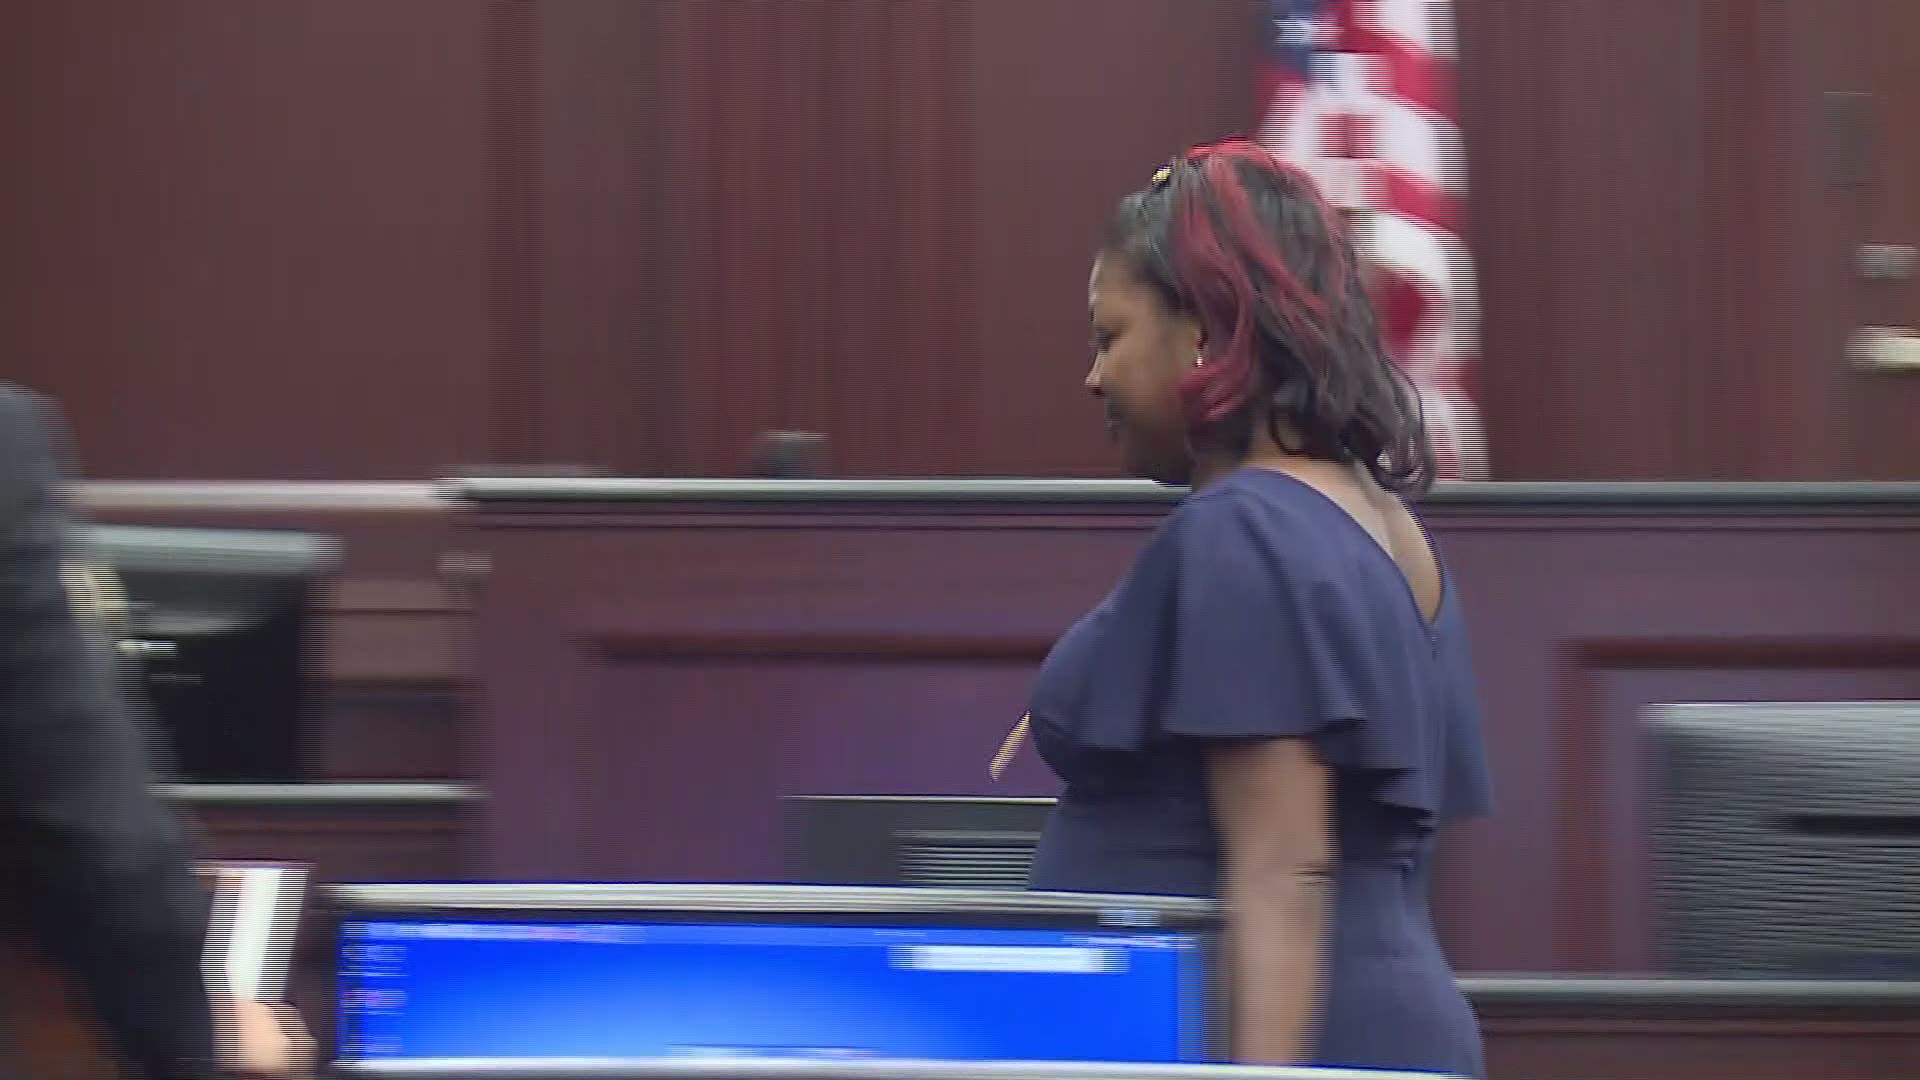 Shanara Mobley gave an emotional testimony to the court during Gloria Williams' sentencing.